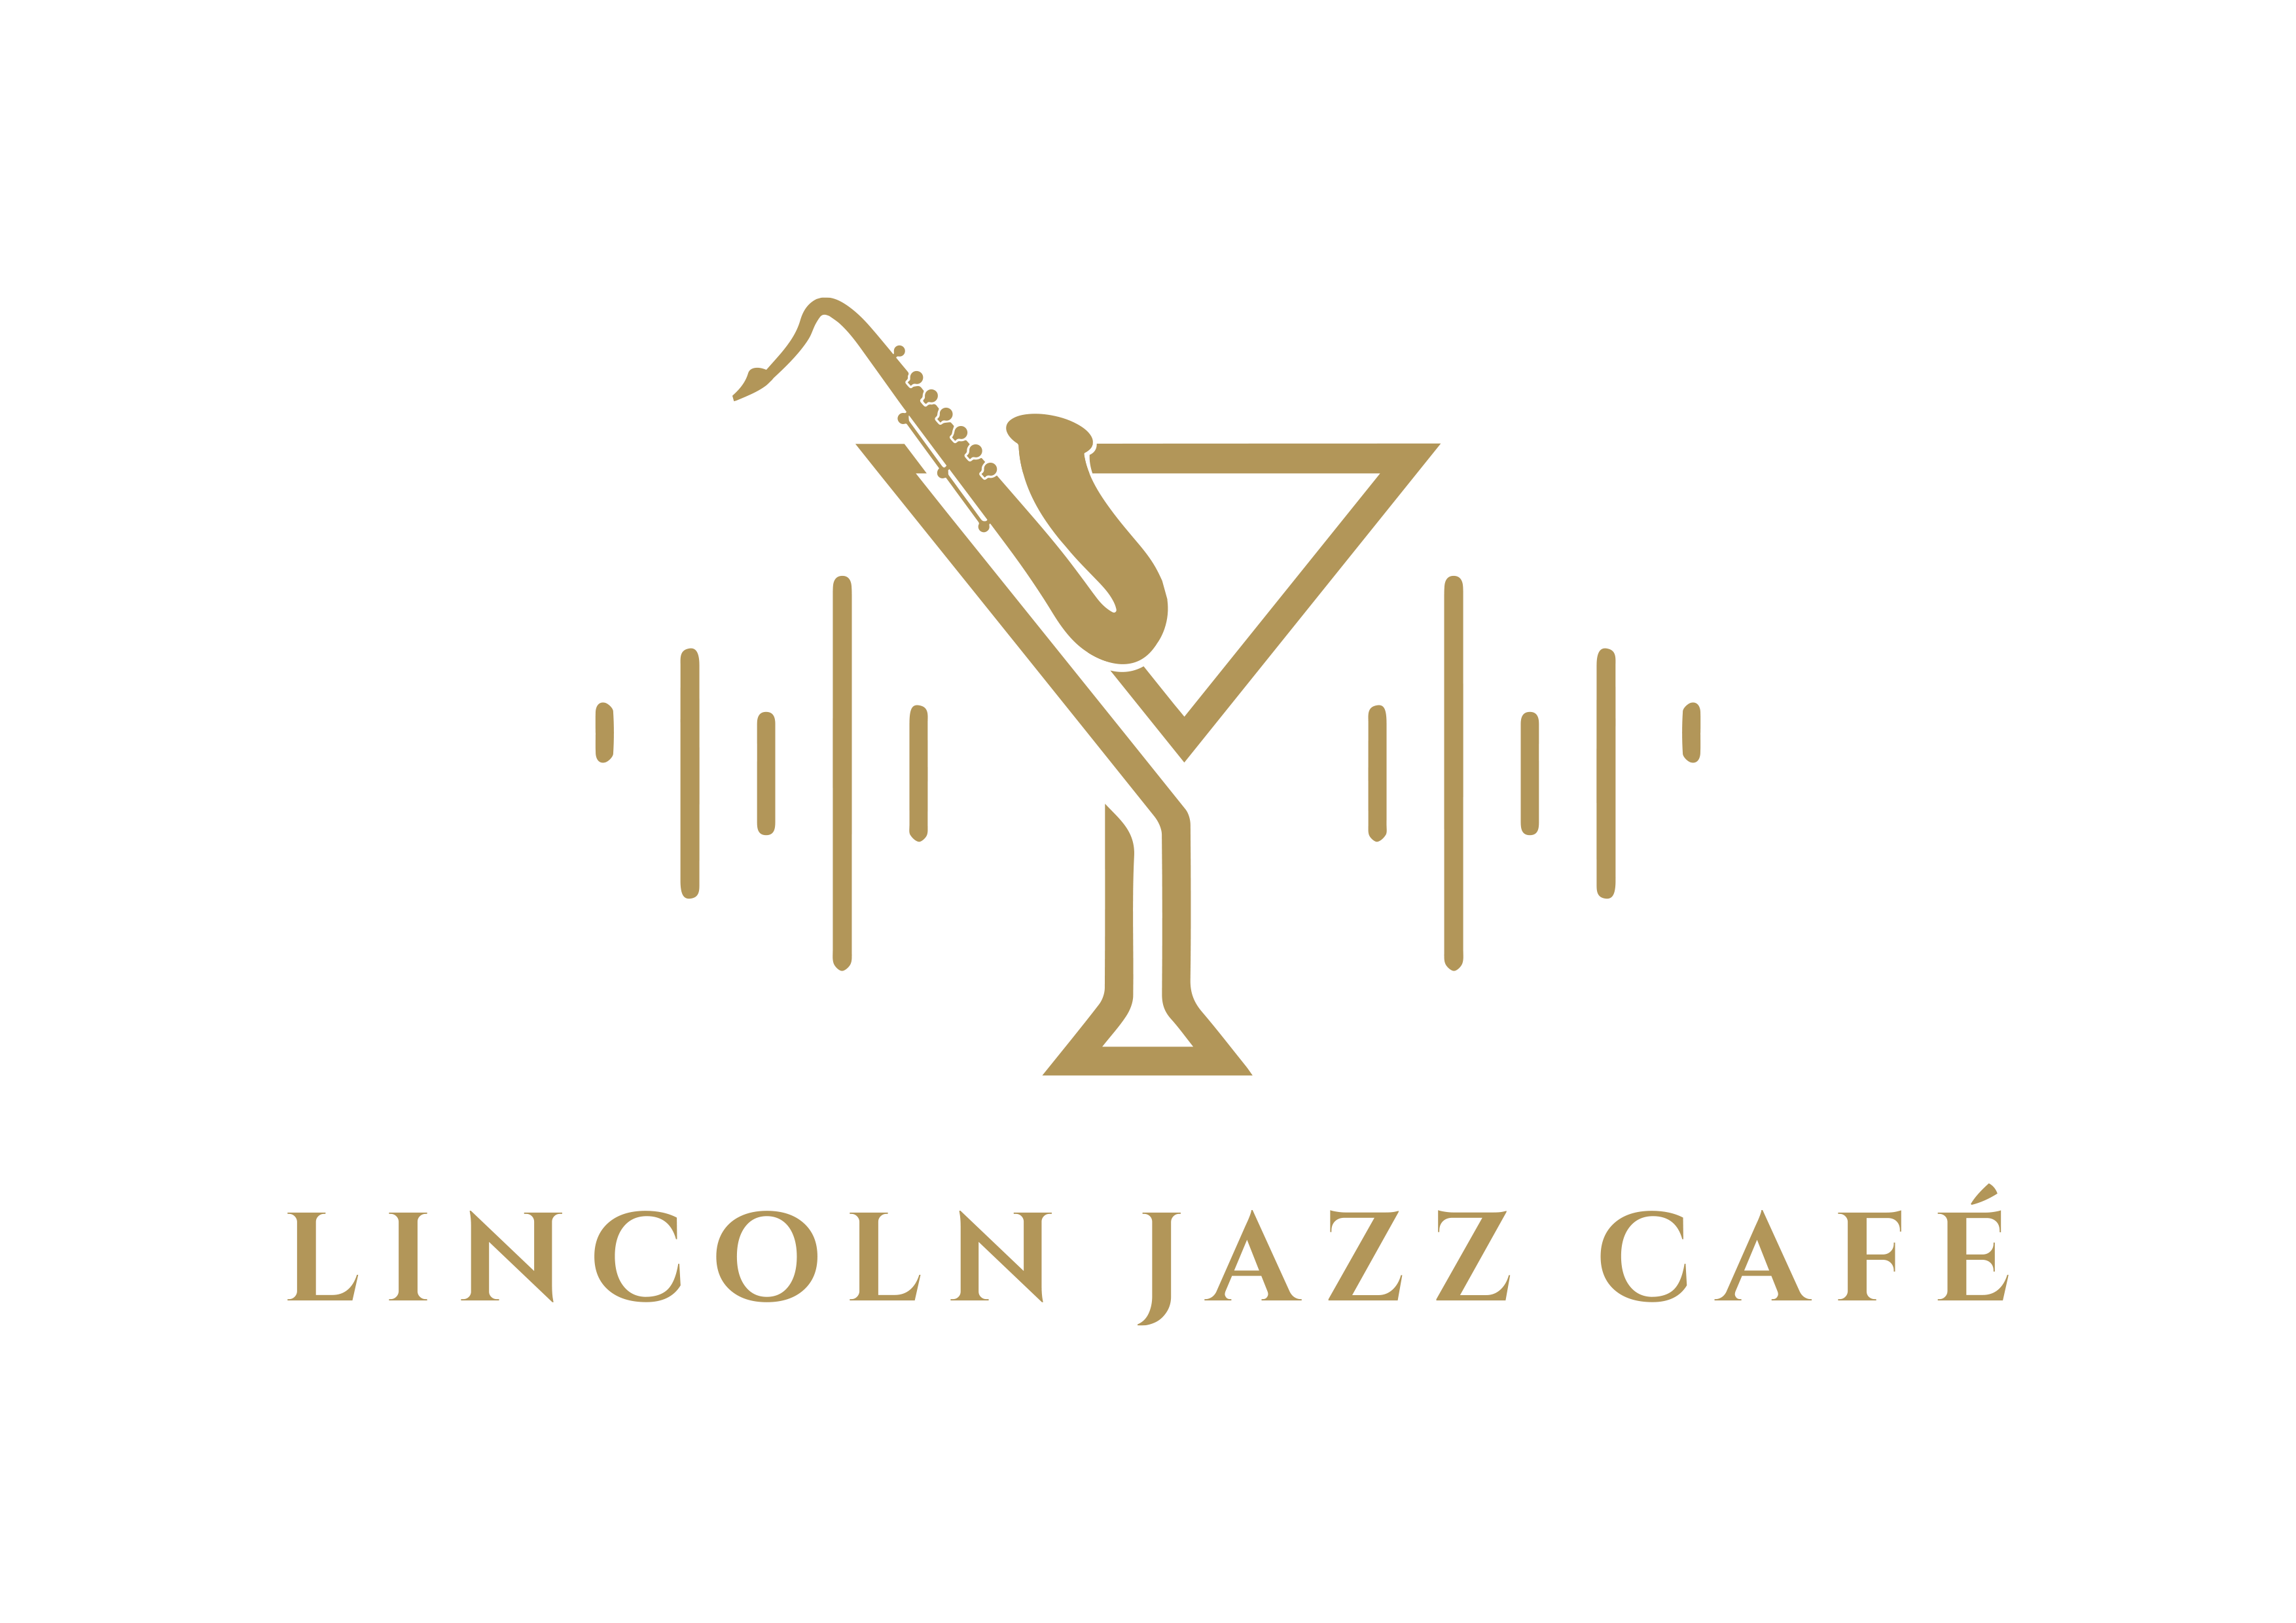 Lincoln Jazz Cafe